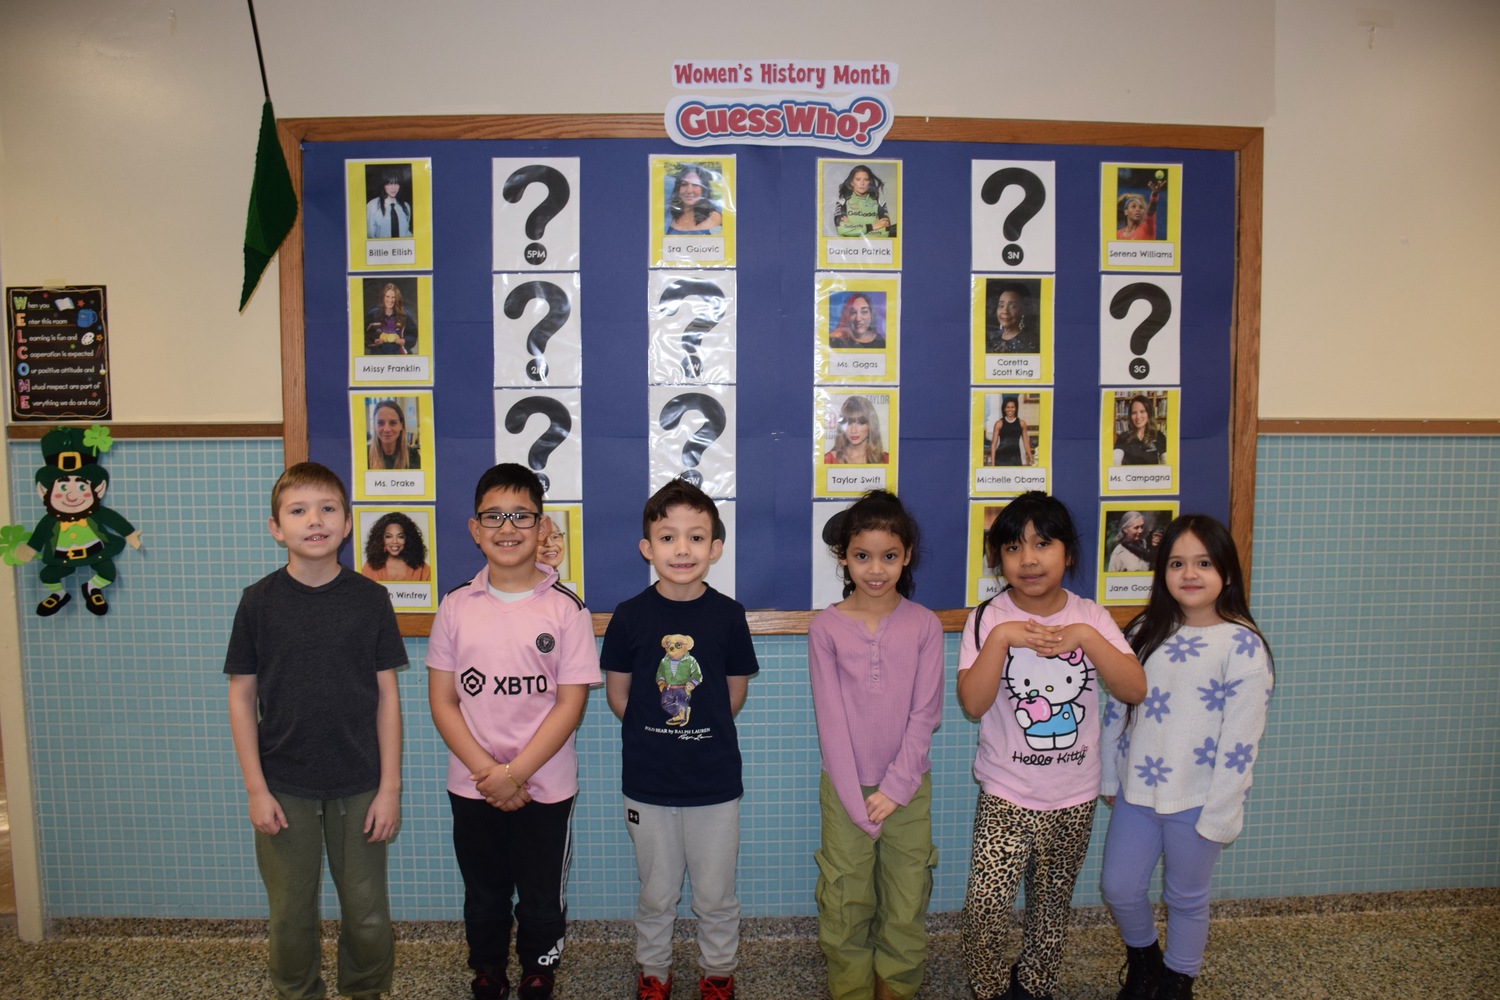 Westhampton Beach Elementary School students are celebrating Women’s History Month with a variety of engaging learning activities. Each class is researching influential women and sharing what they learned through displays outside their classrooms. Students are also taking part in a schoolwide “Guess Who” game where they guess the name of an influential woman based on clues provided to them. Once they discover who their 